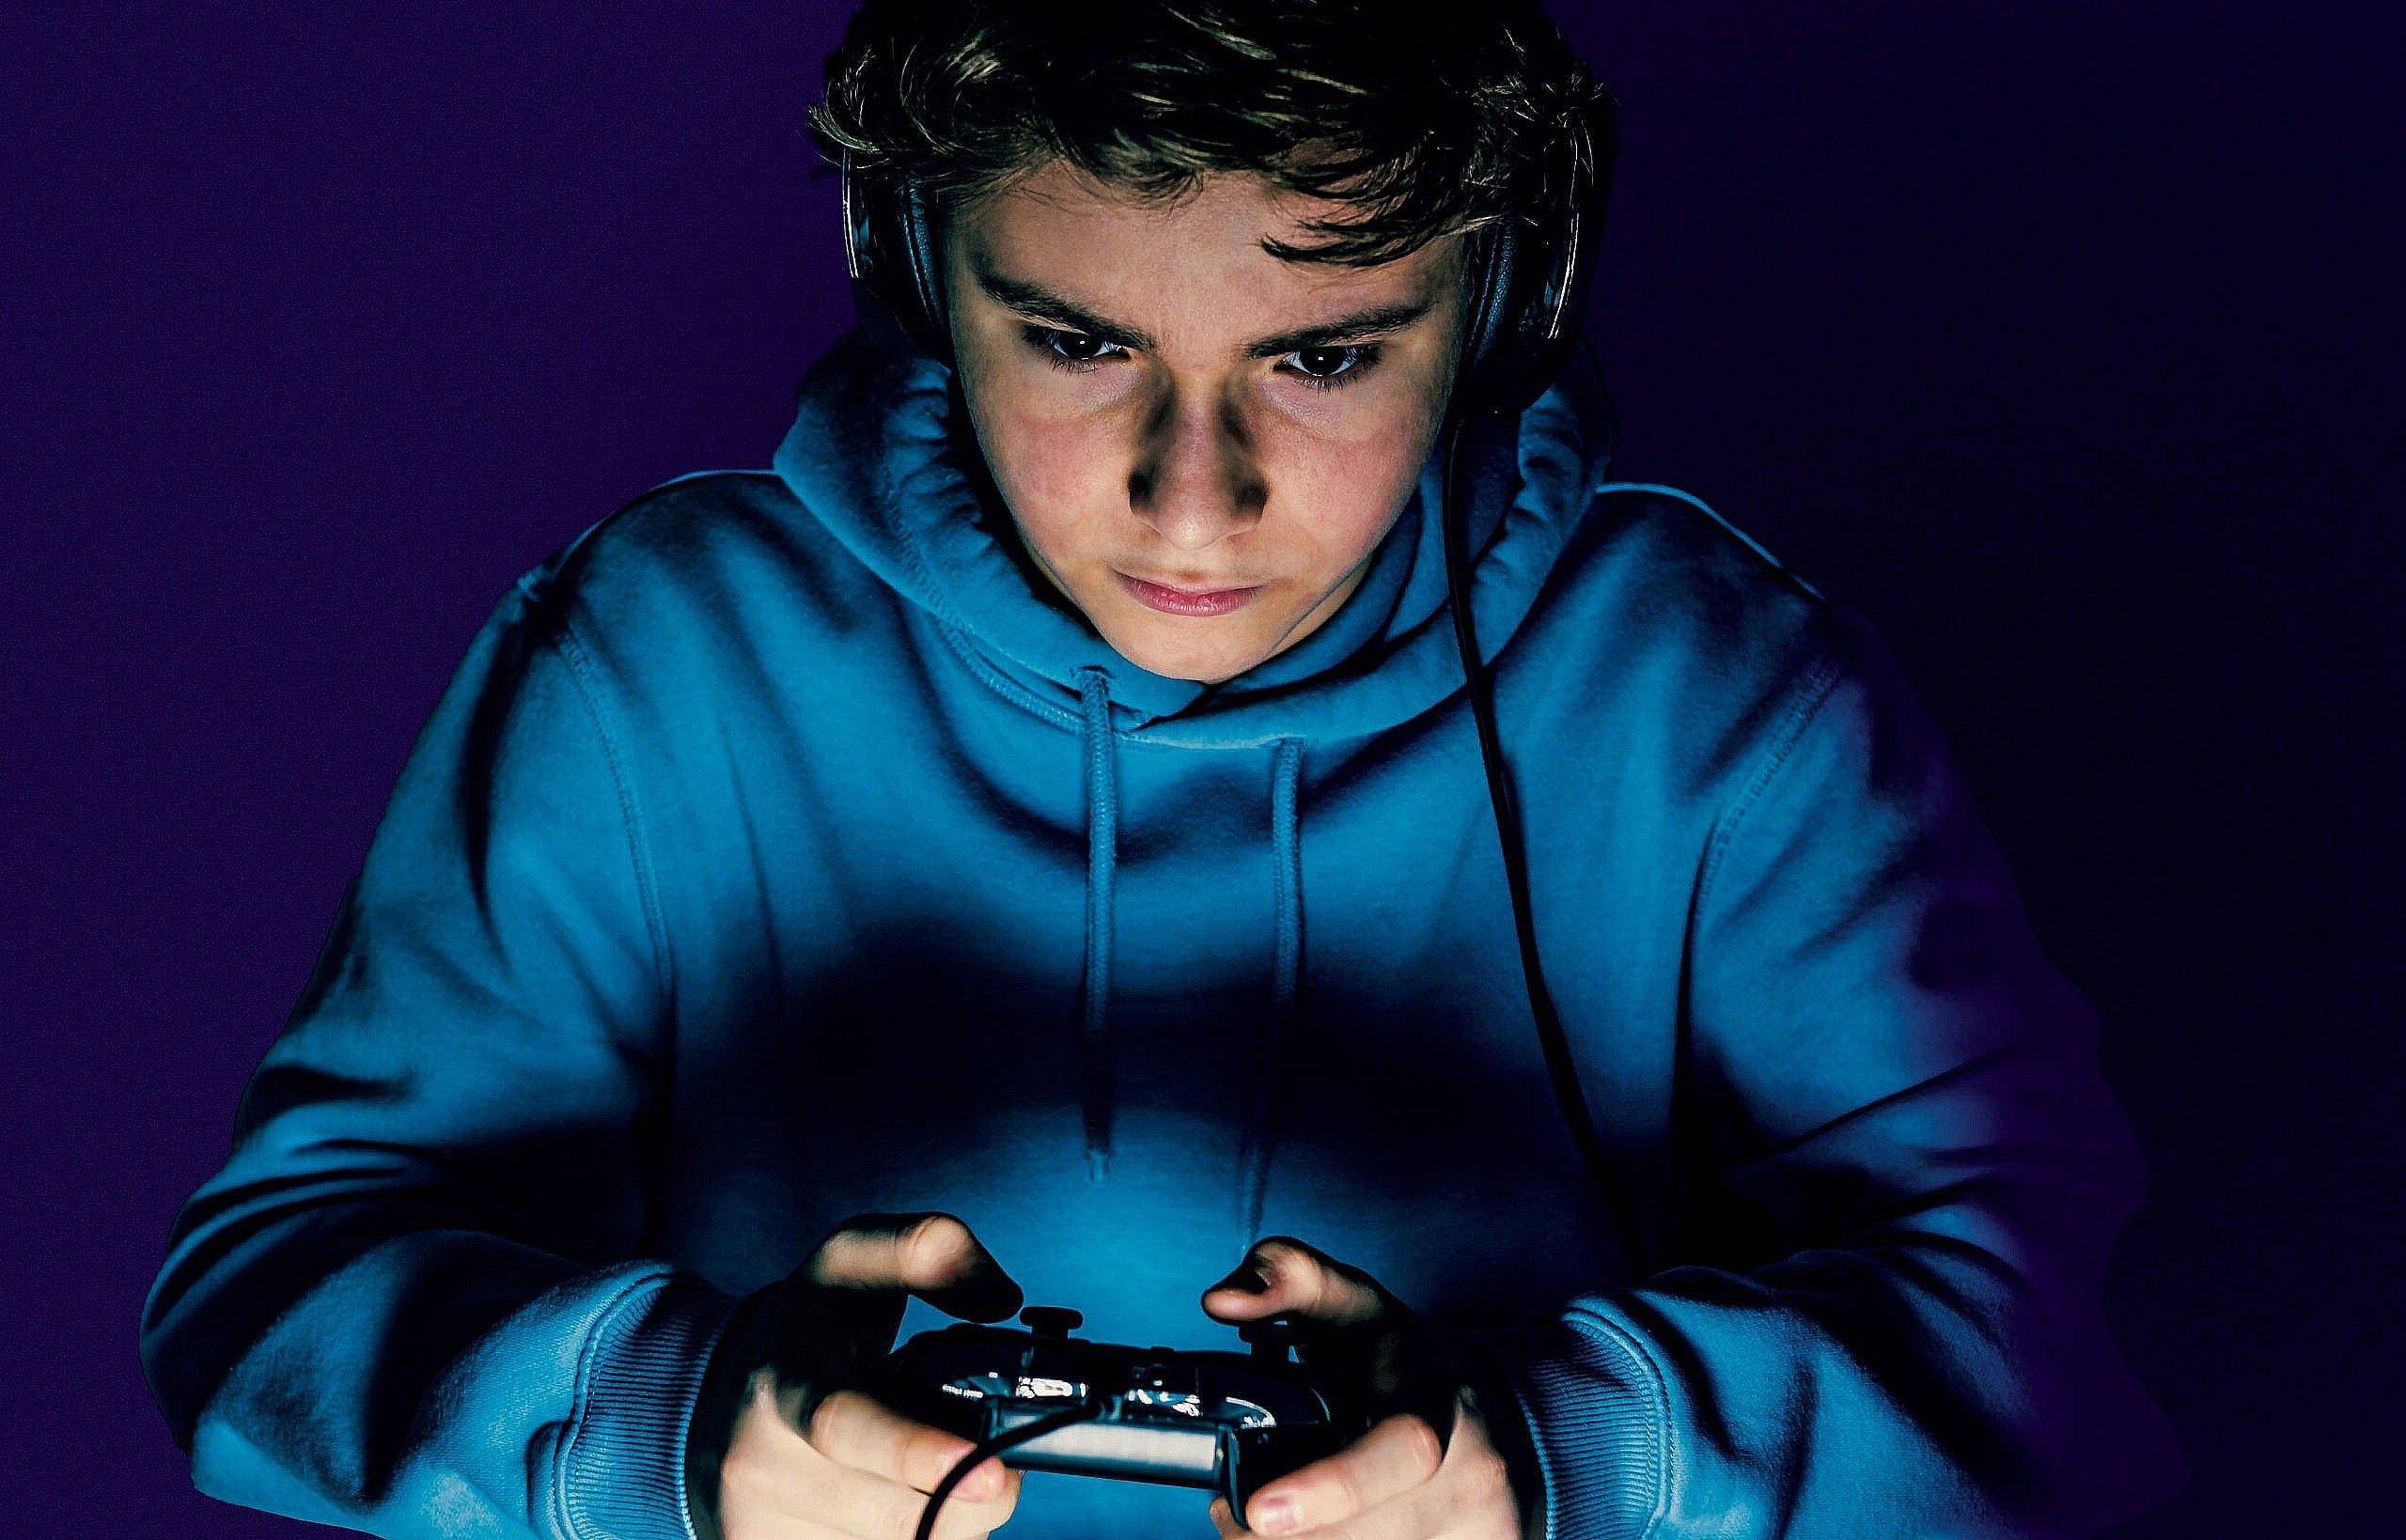 A boy in a royal blue hoodie stares intently at a screen ahead of him, holding a gaming console in his hands